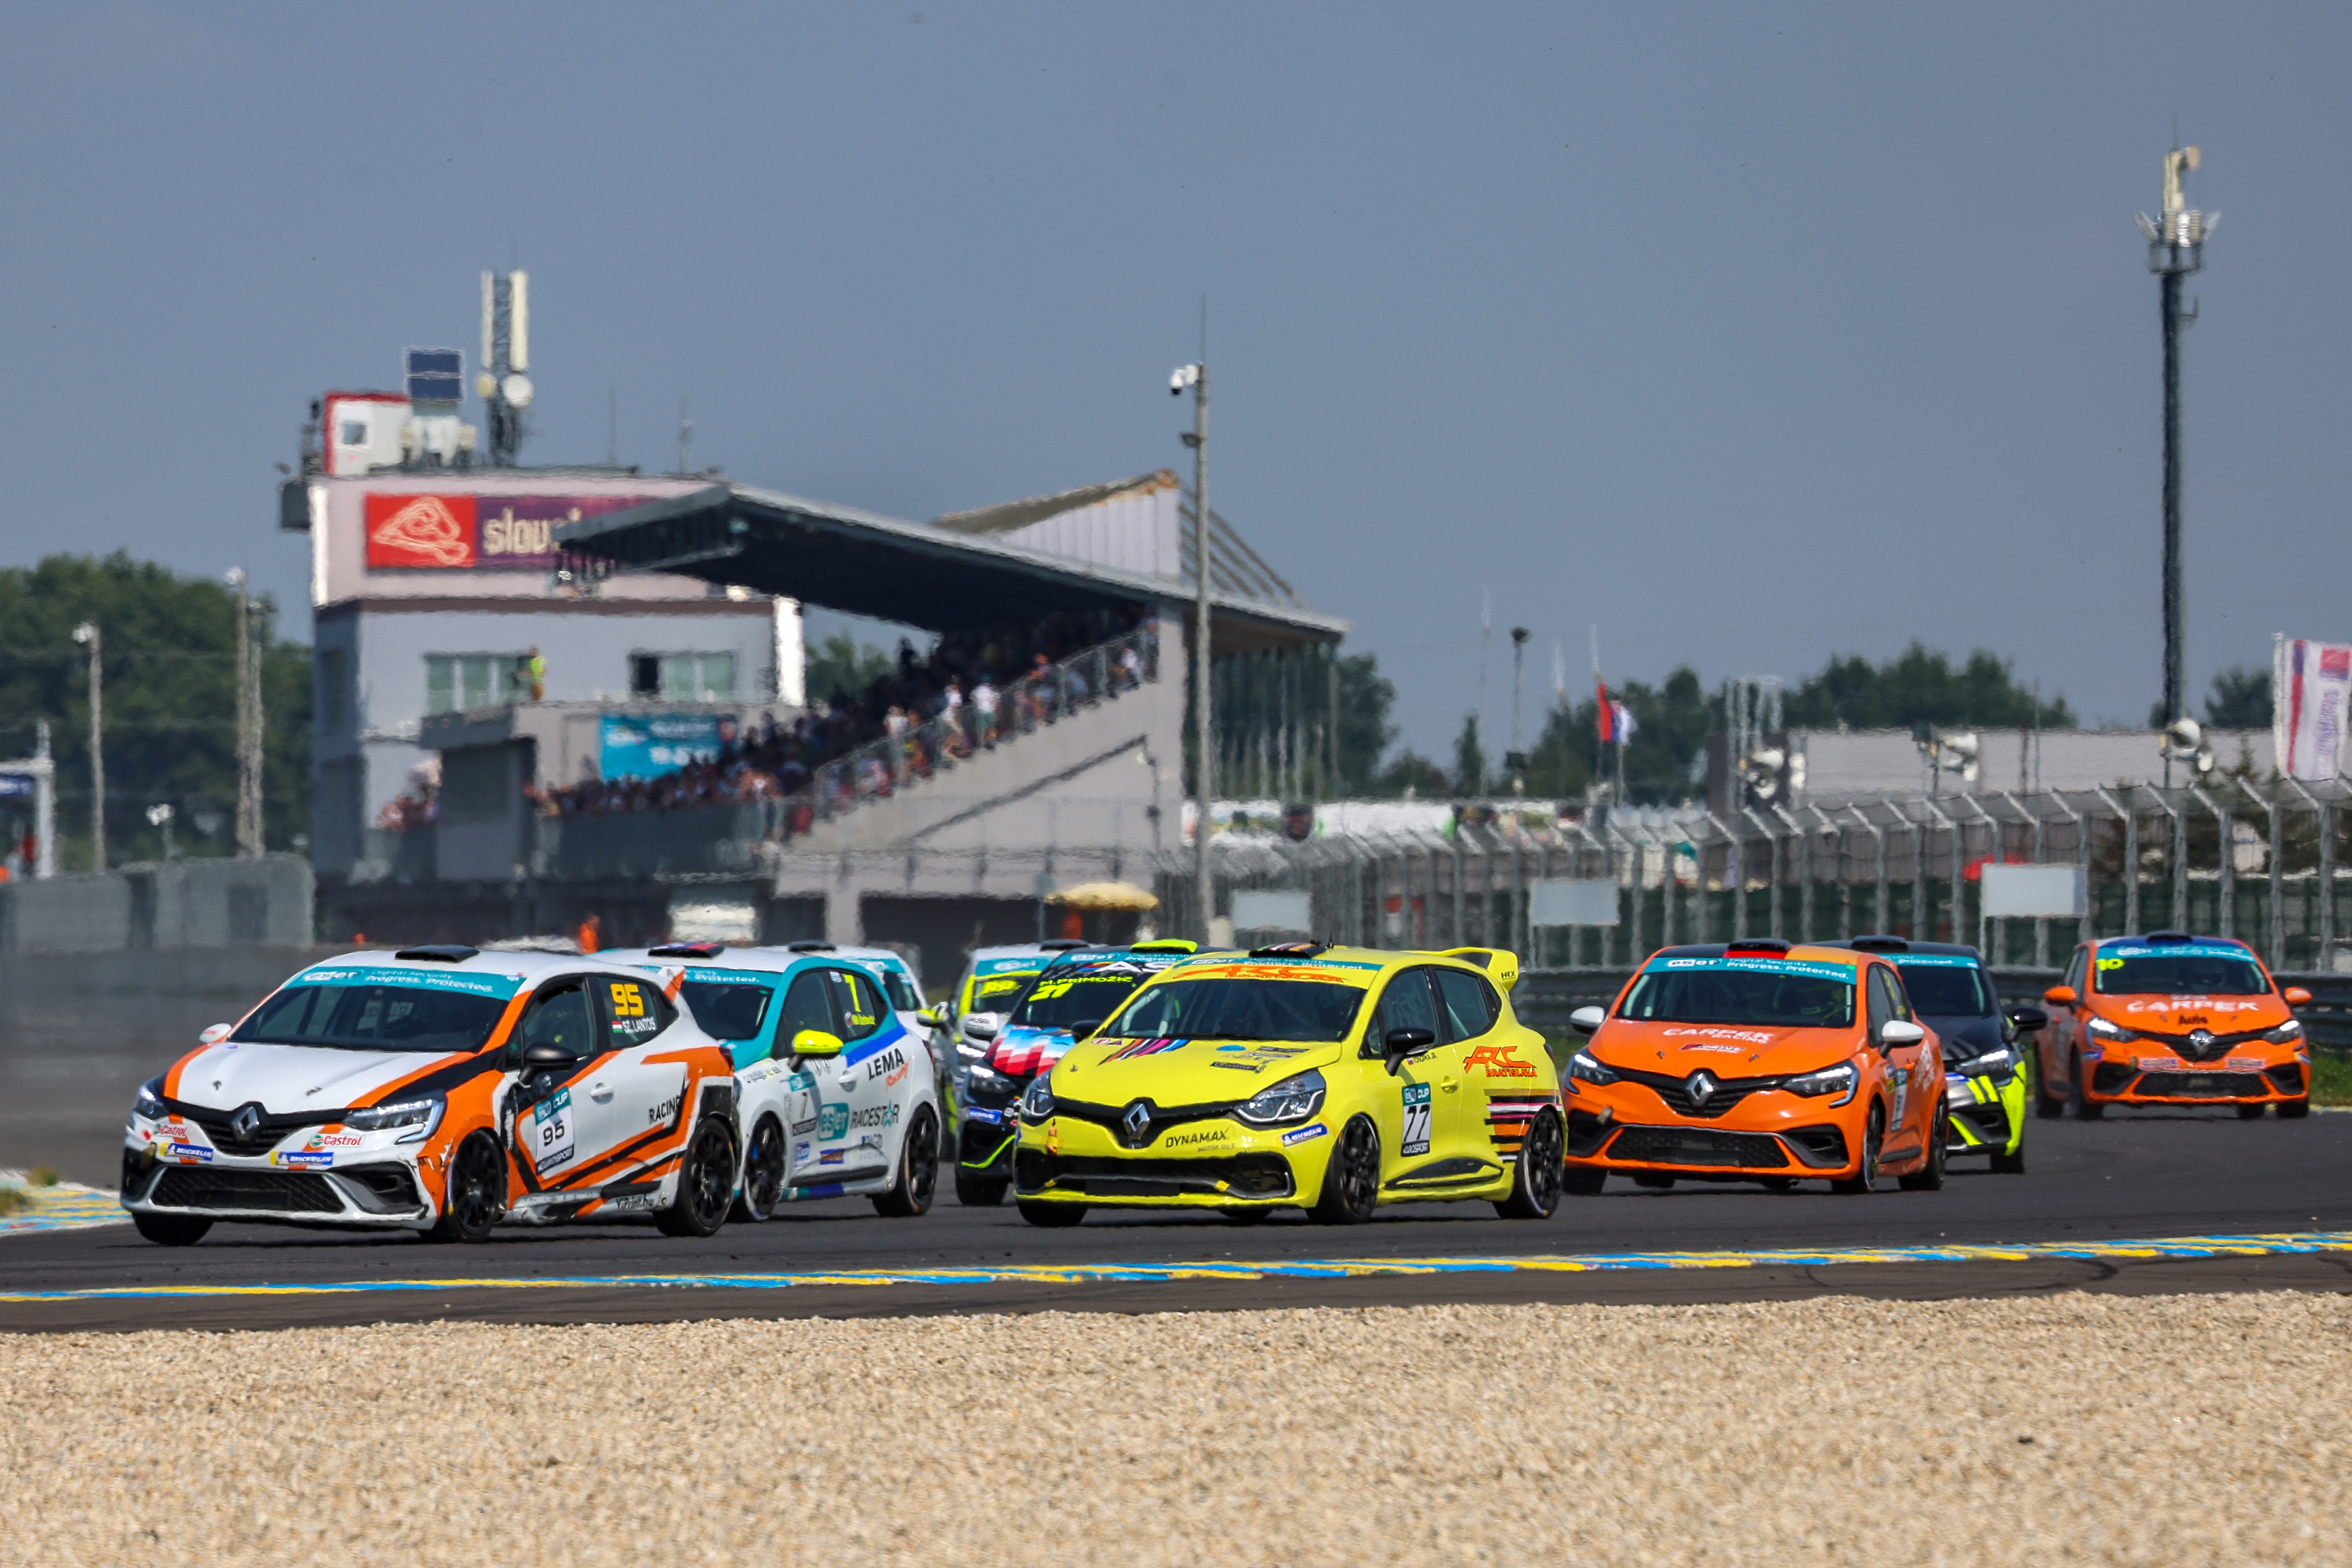 Kadlečík and Pekař secure their titles in the Clio Cup with further victories